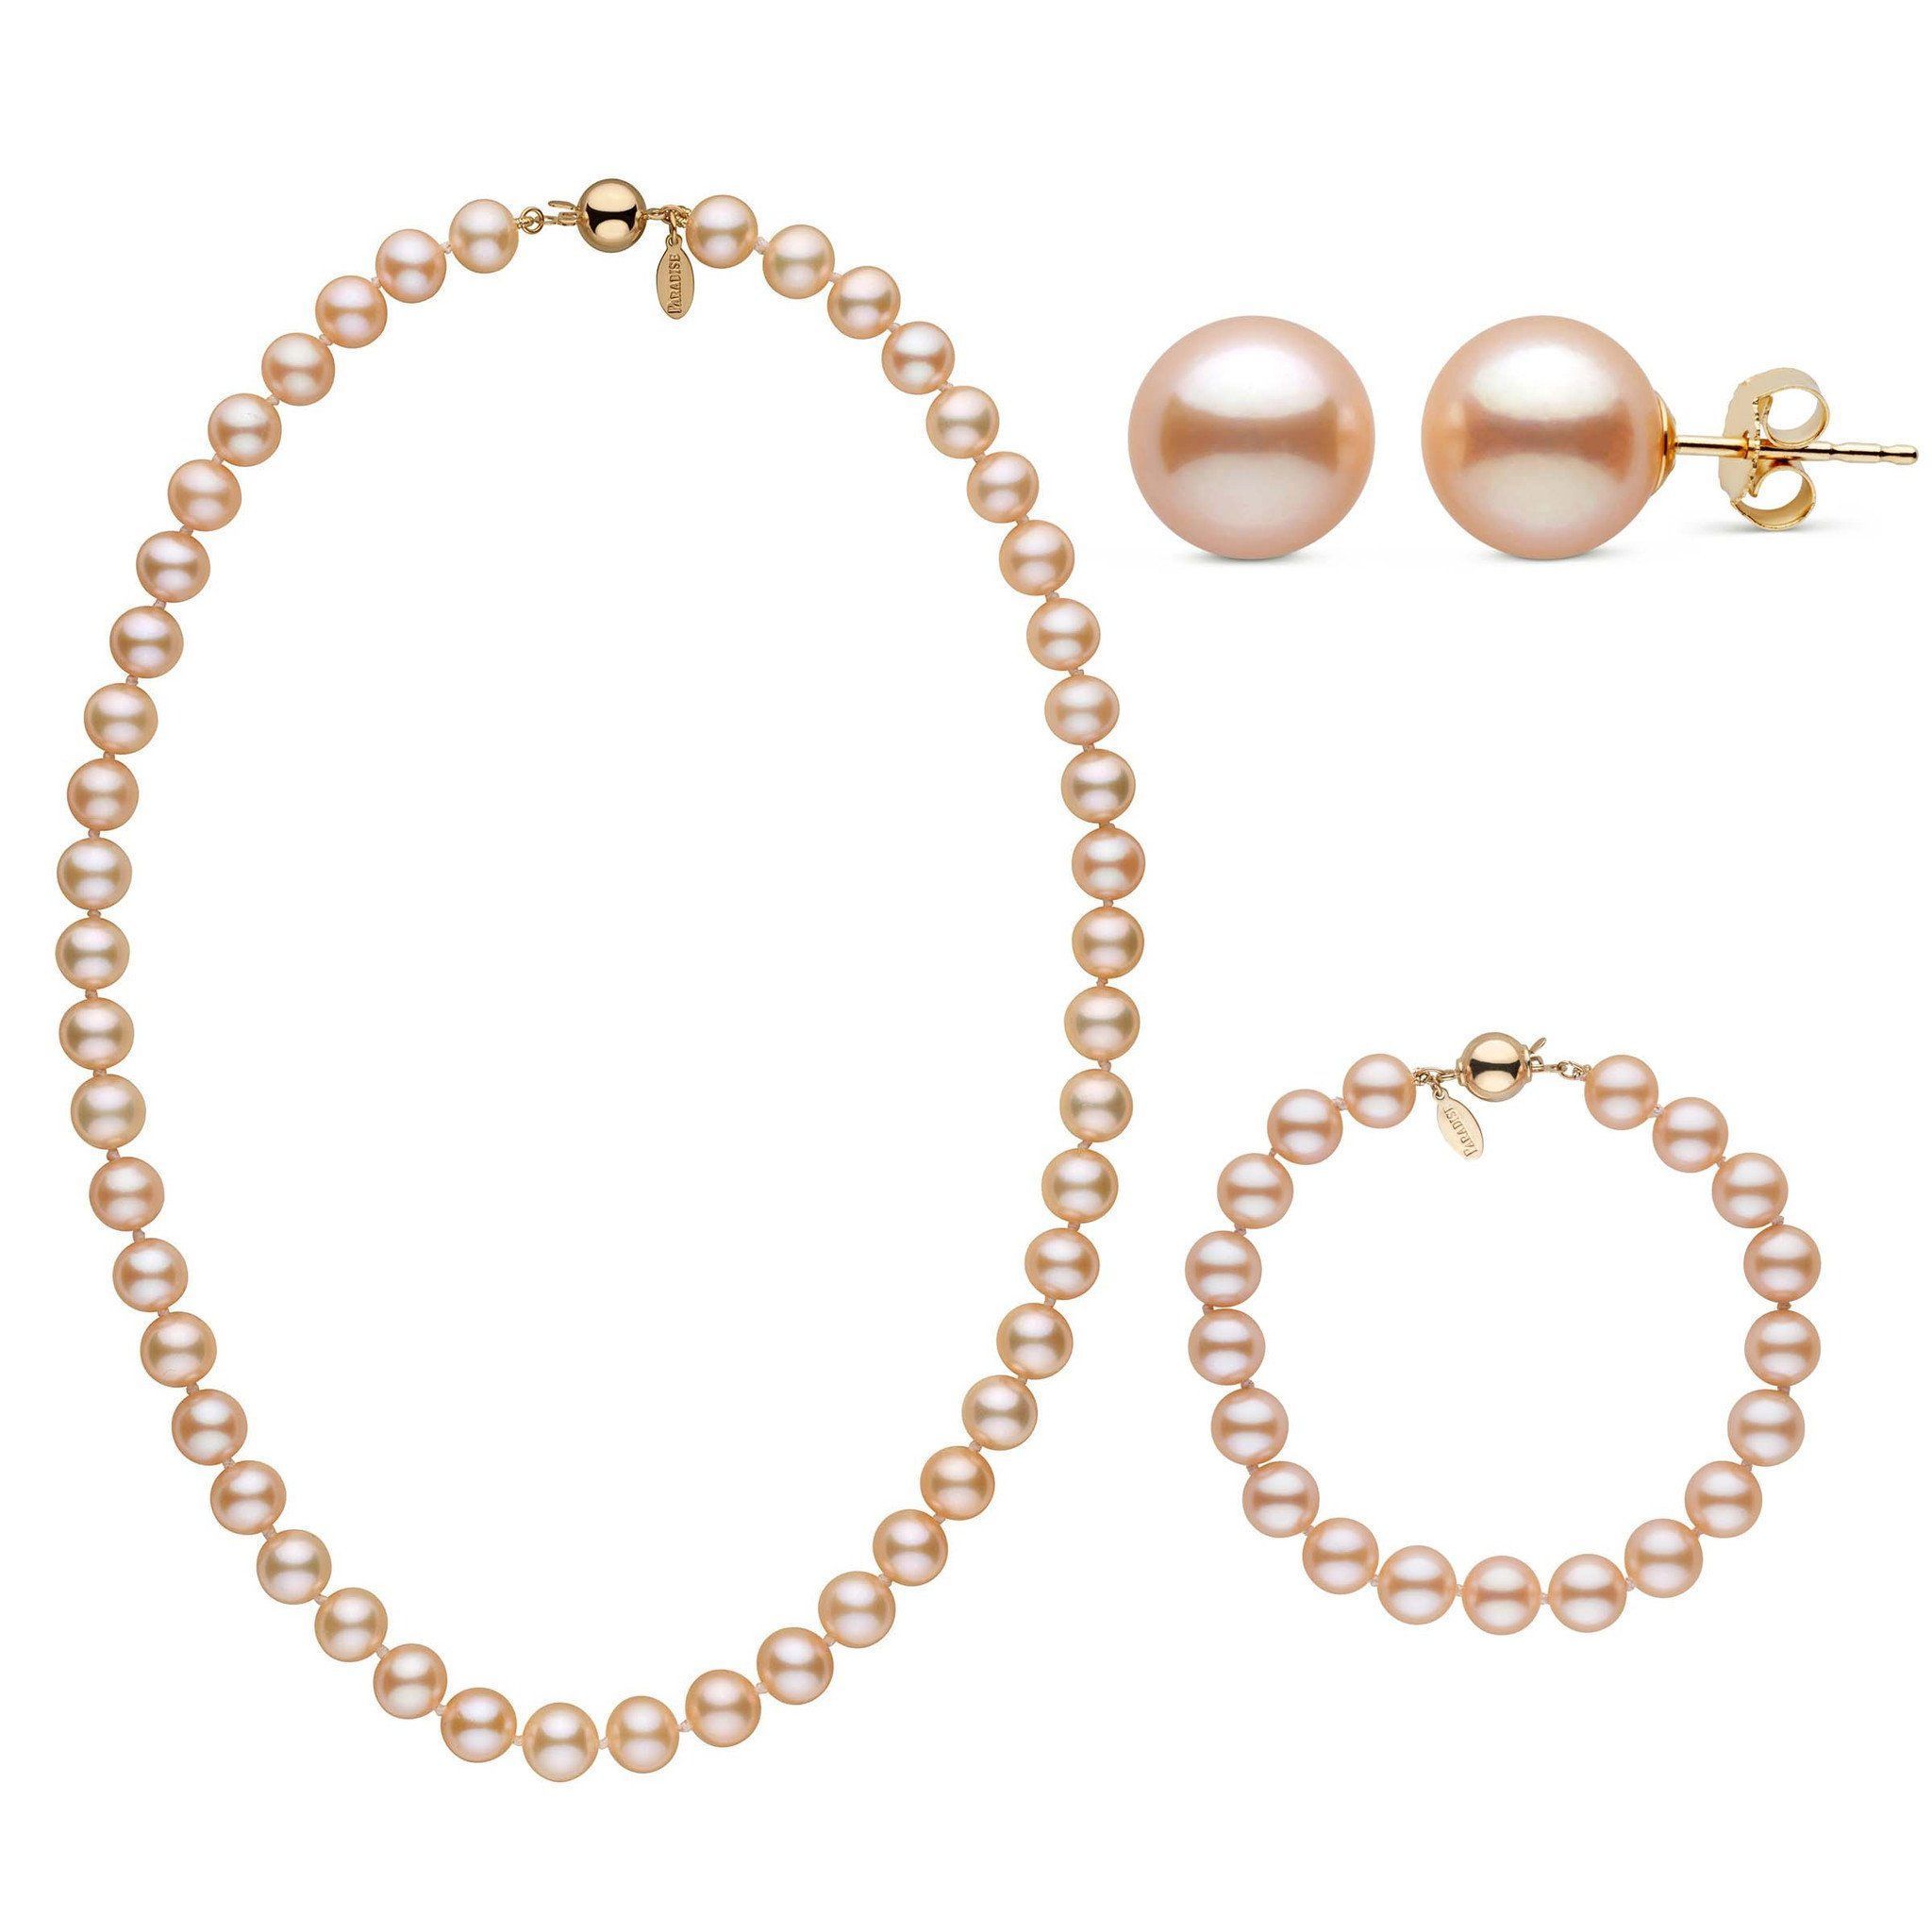 Necklace Bracelet and Earrings three Piece 8.5-9.0 mm Pink to Peach Freshadama Freshwater Pearl Set